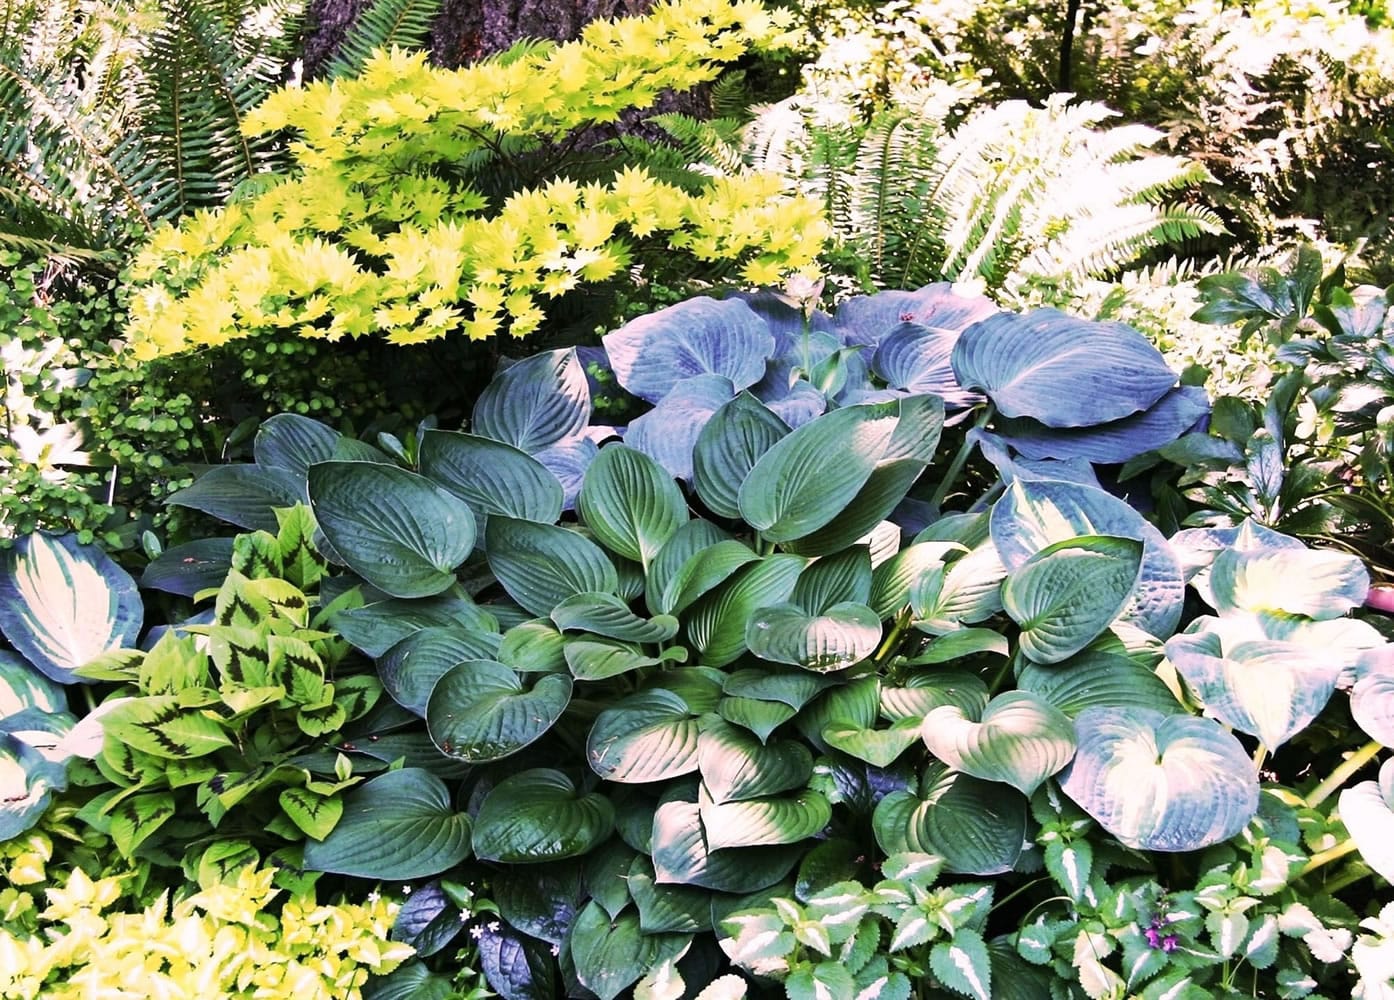 Under a canopy of Douglas fir, a mix of hostas and hardy perennials forms an intricate patchwork of mottled light and shade.